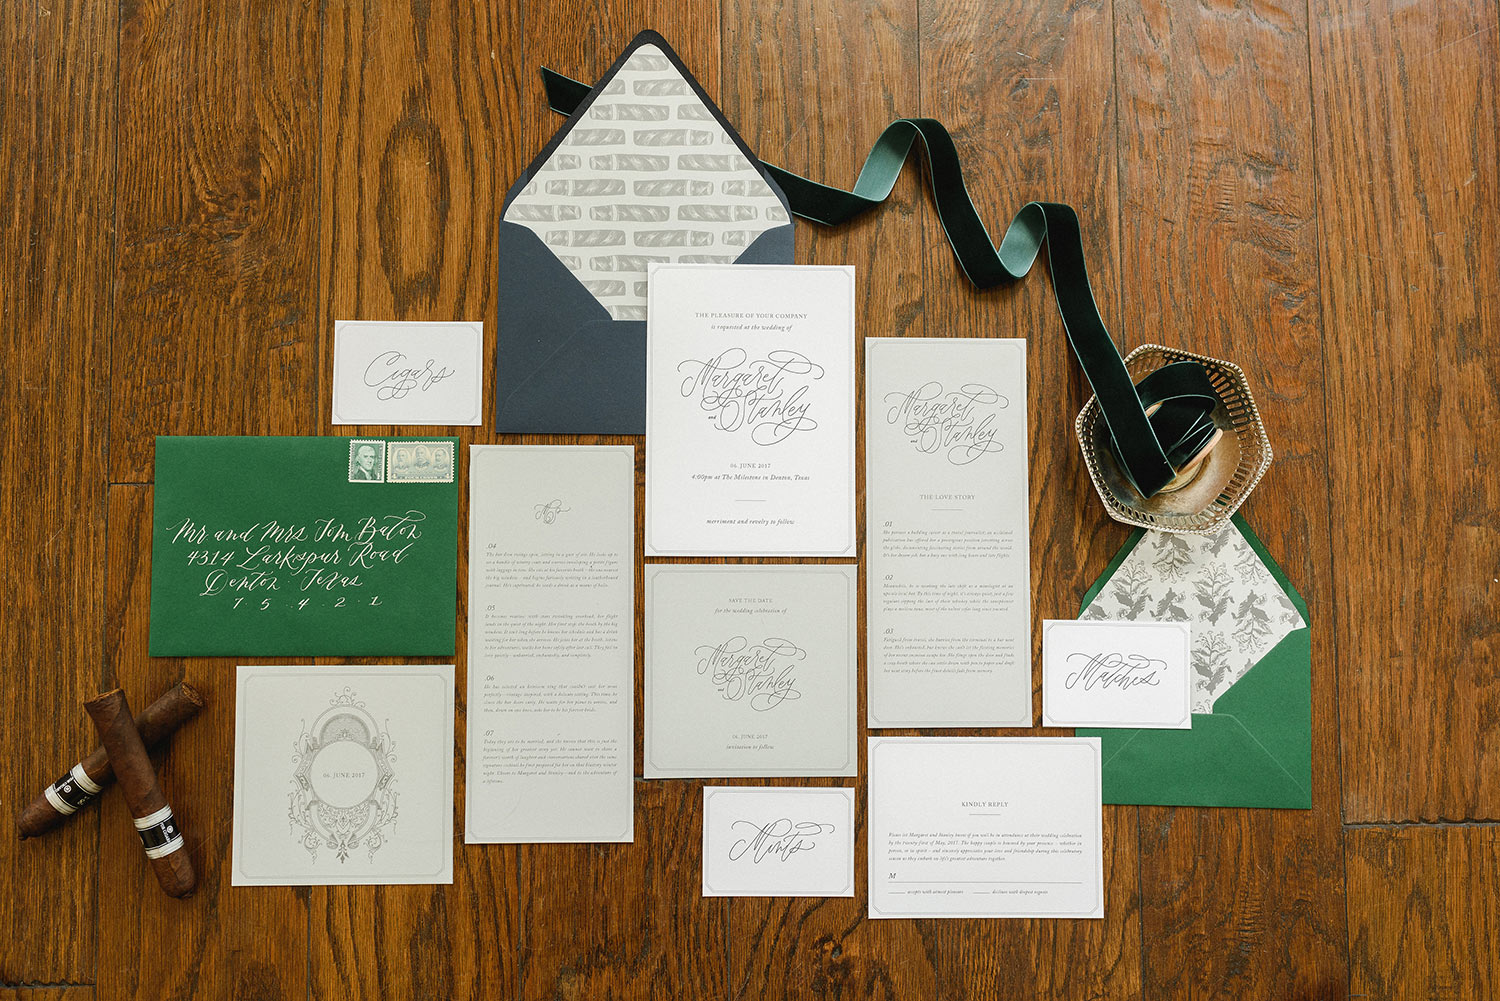 Green wedding invitation with cigars for a wedding at the Mileston in Denton TX